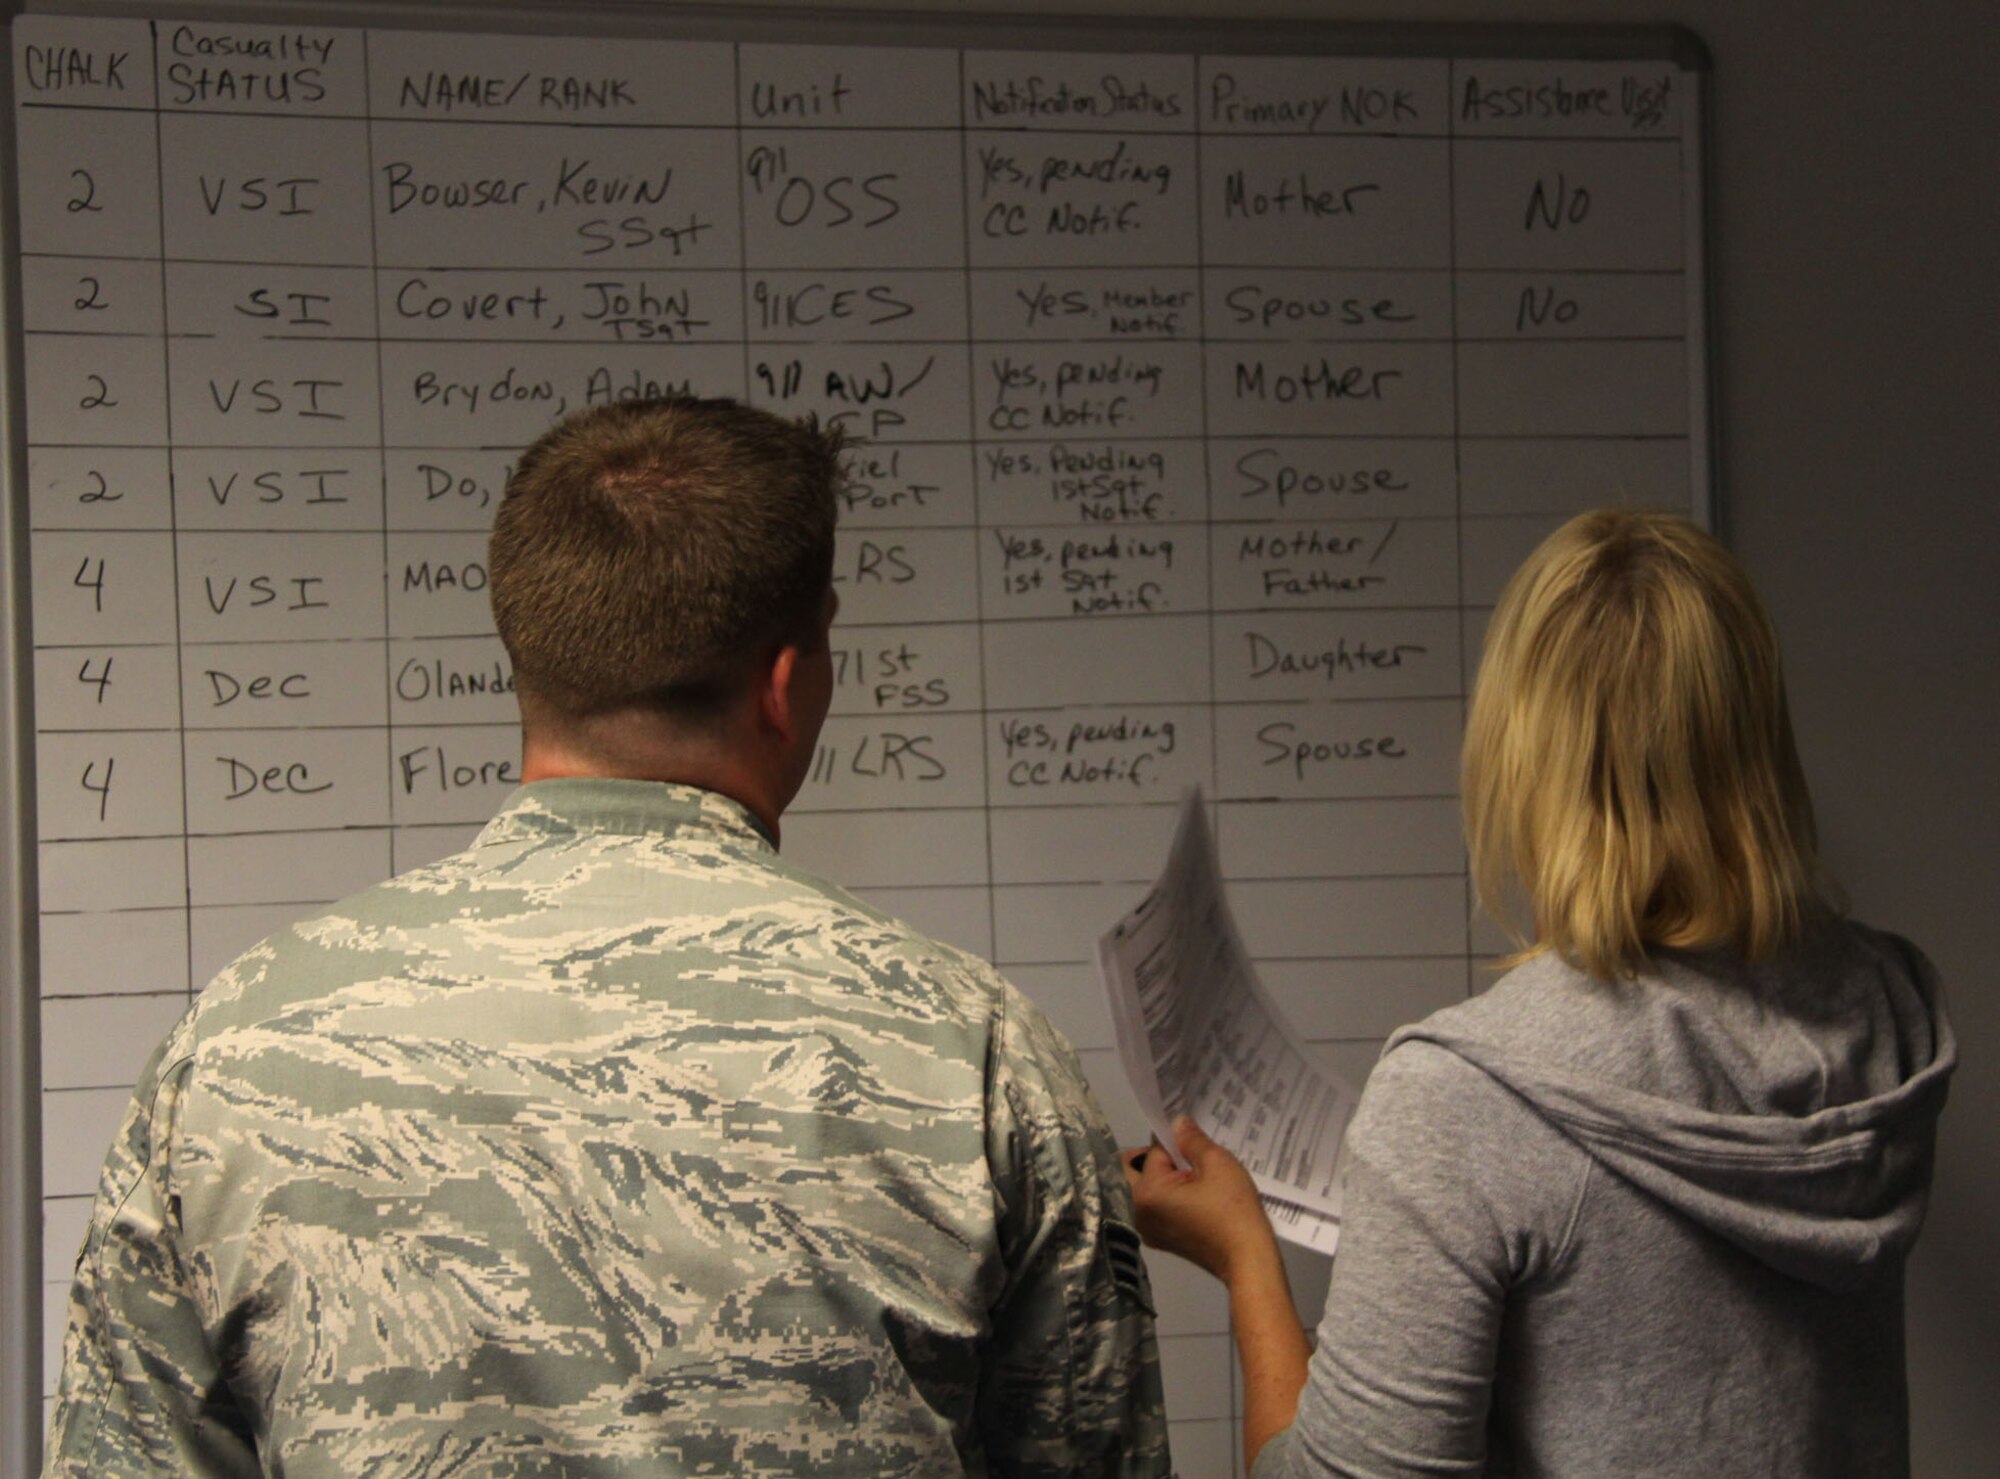 Senior Airman Zachary Young, of the 171st Air Refueling Wing,  and Debbie Vasko, of the 911th Airlift Wing, work together as Casualty Augmentation Support Team members to update the 911th AW’s Casualty Assistance status board, during a National Disaster Medical System Exercise at the Pittsburgh International Airport Air Reserve Station, July 12, 2014.  (U.S. Air Force photo by Staff Sgt. Jonathan Hehnly)